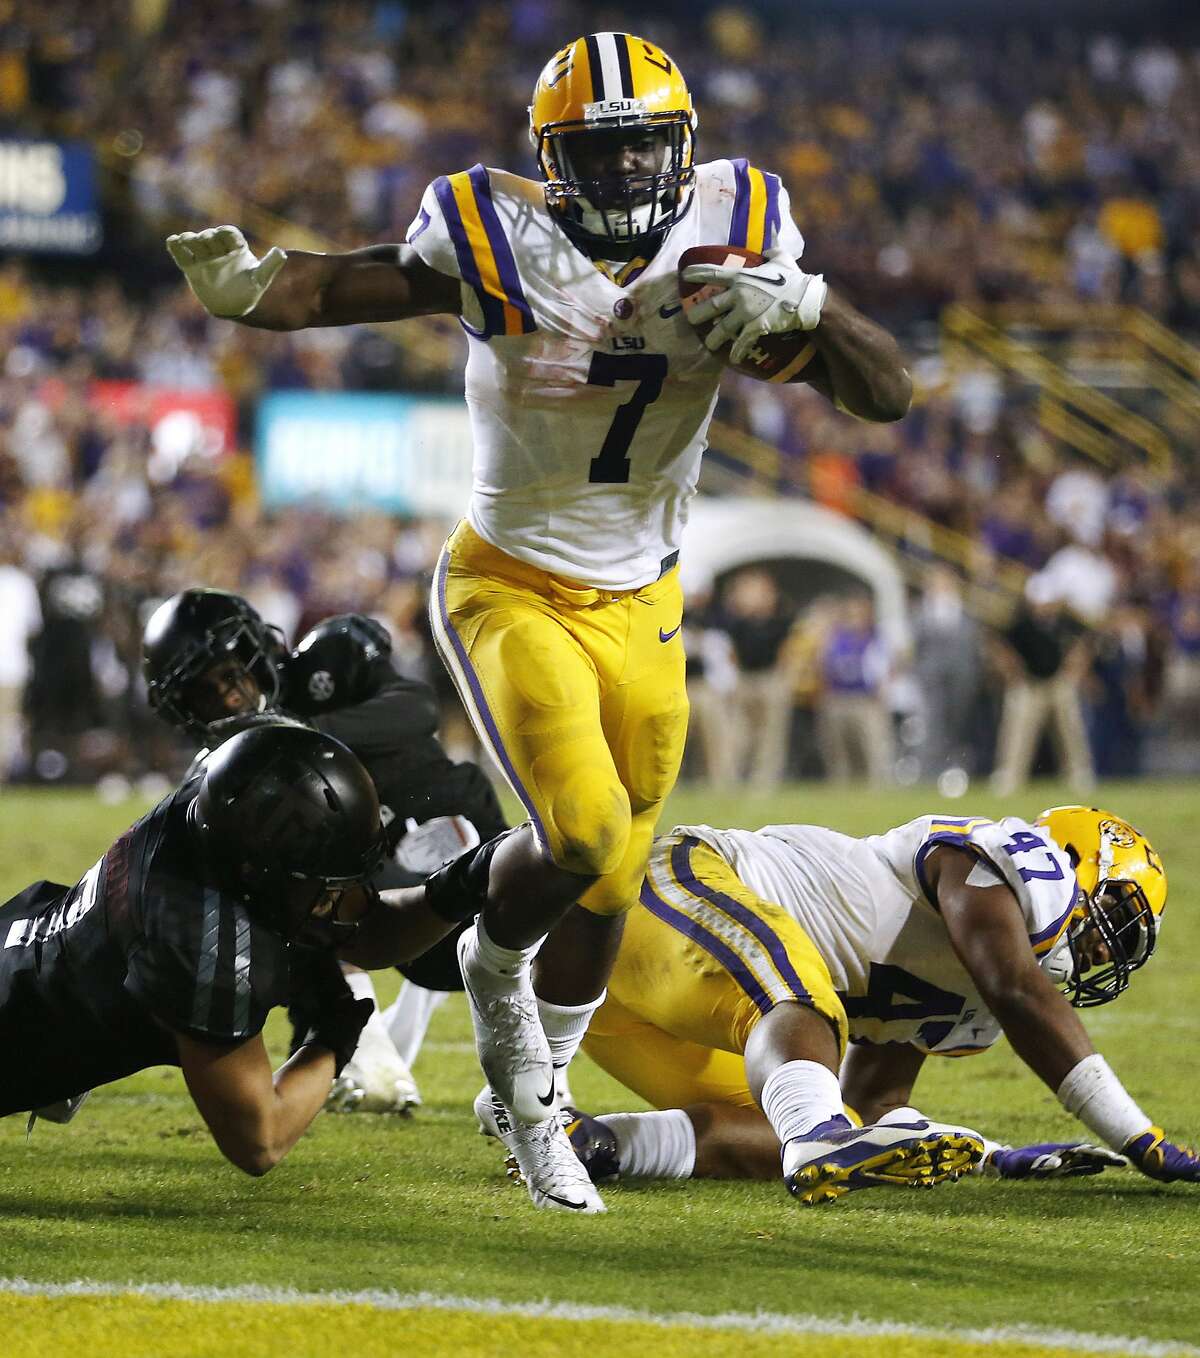 FILE - In this Saturday, Nov. 28, 2015, file photo, LSU running back Leonard Fournette (7) scores a touchdown during the second half of an NCAA college football game against Texas A&M in Baton Rouge, La. Fournette has been named to the AP All-America football team. (AP Photo/Jonathan Bachman, File)